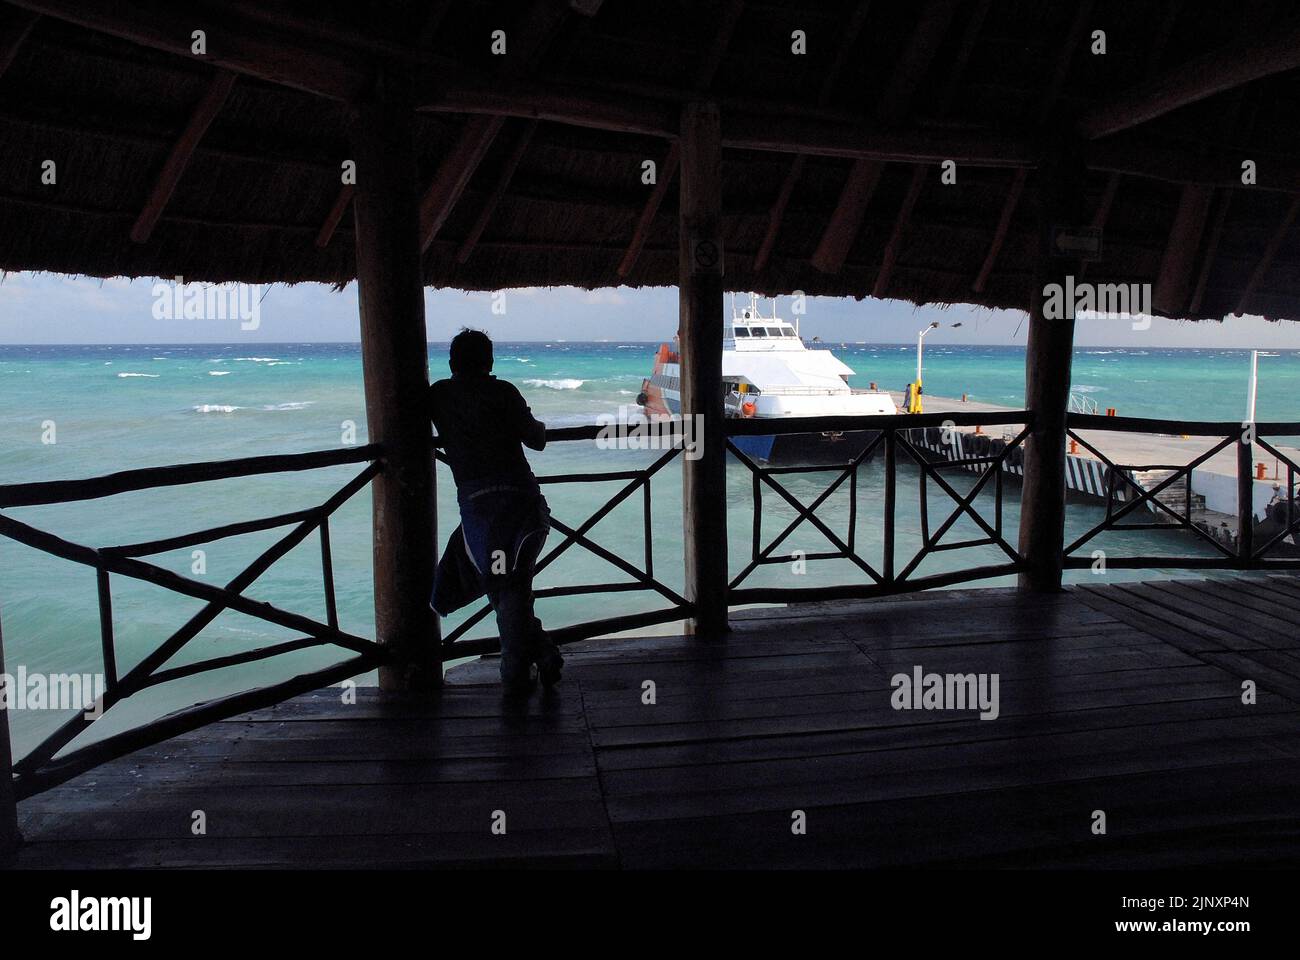 Silhouette of a man at the maritime station watching Ferries moored ready to depart in Playa del Carmen, Mexico Stock Photo